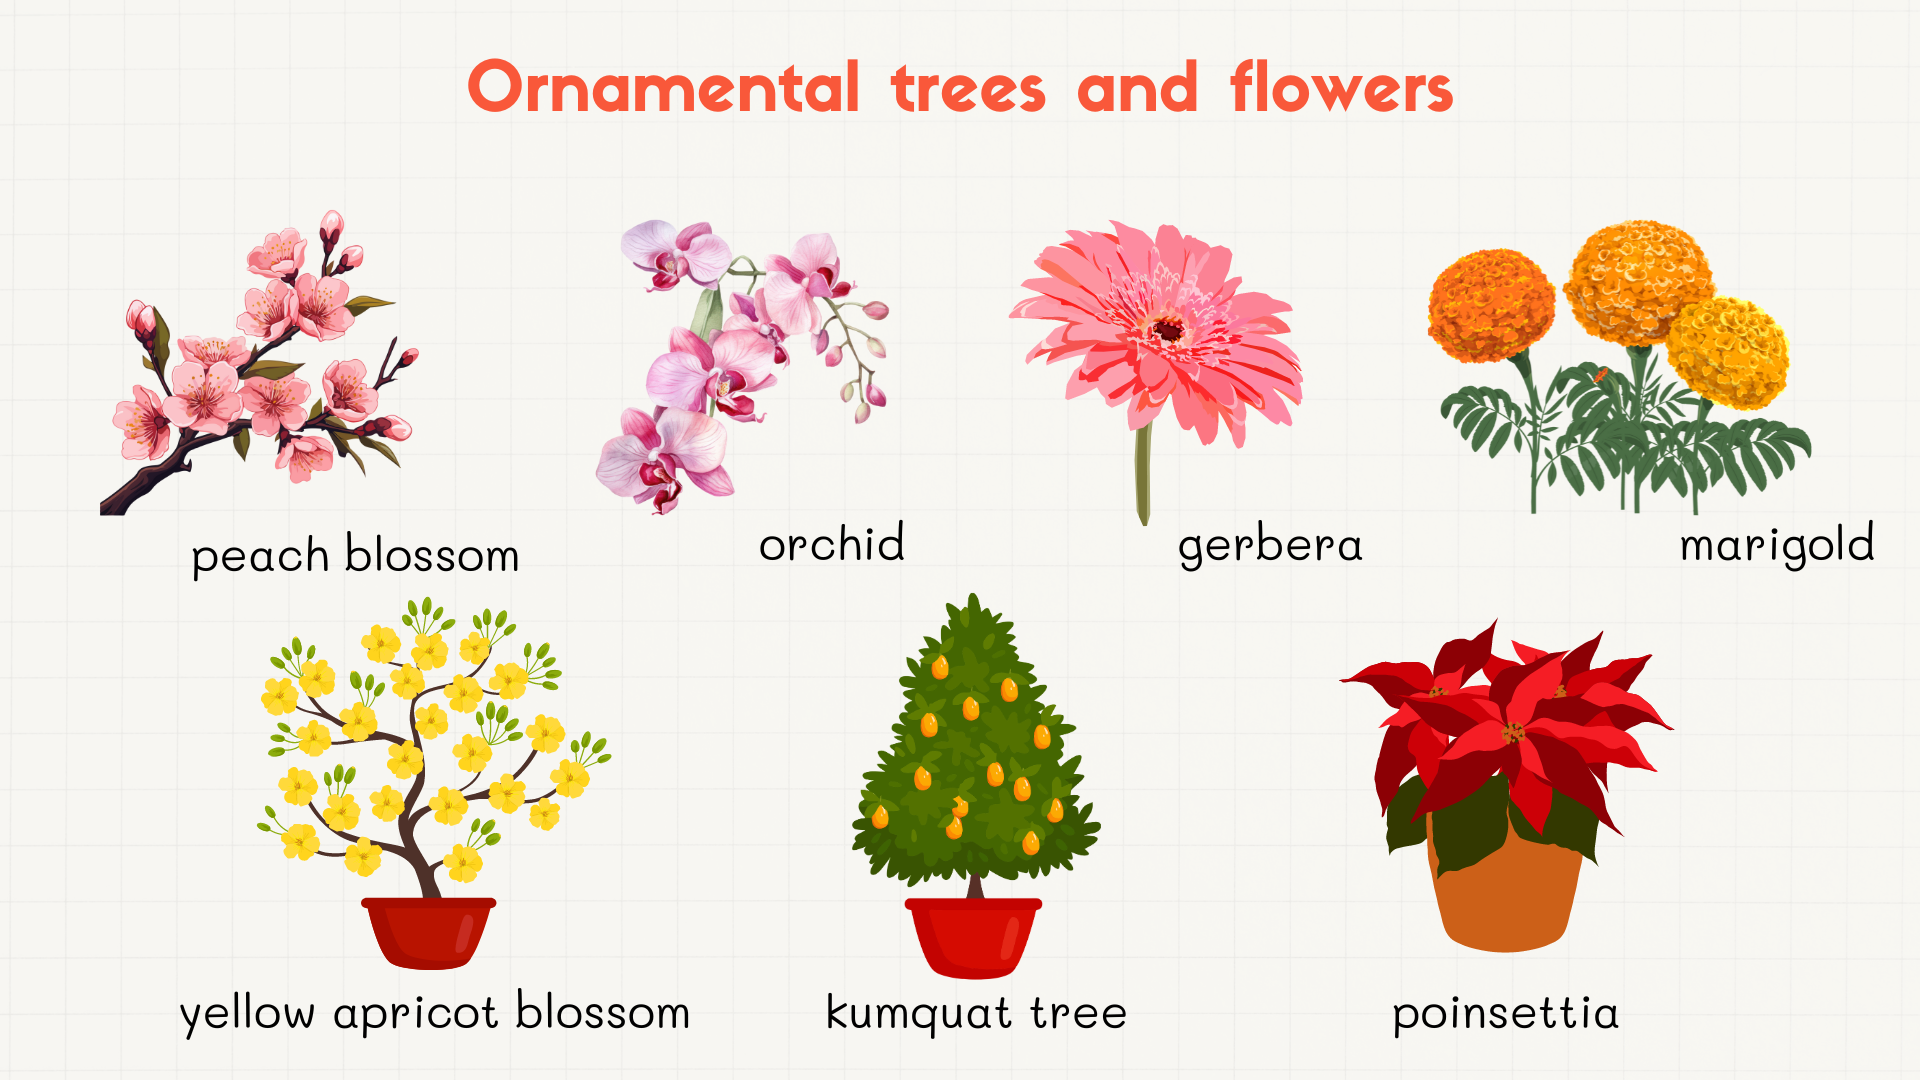  Ornamental trees and flowers